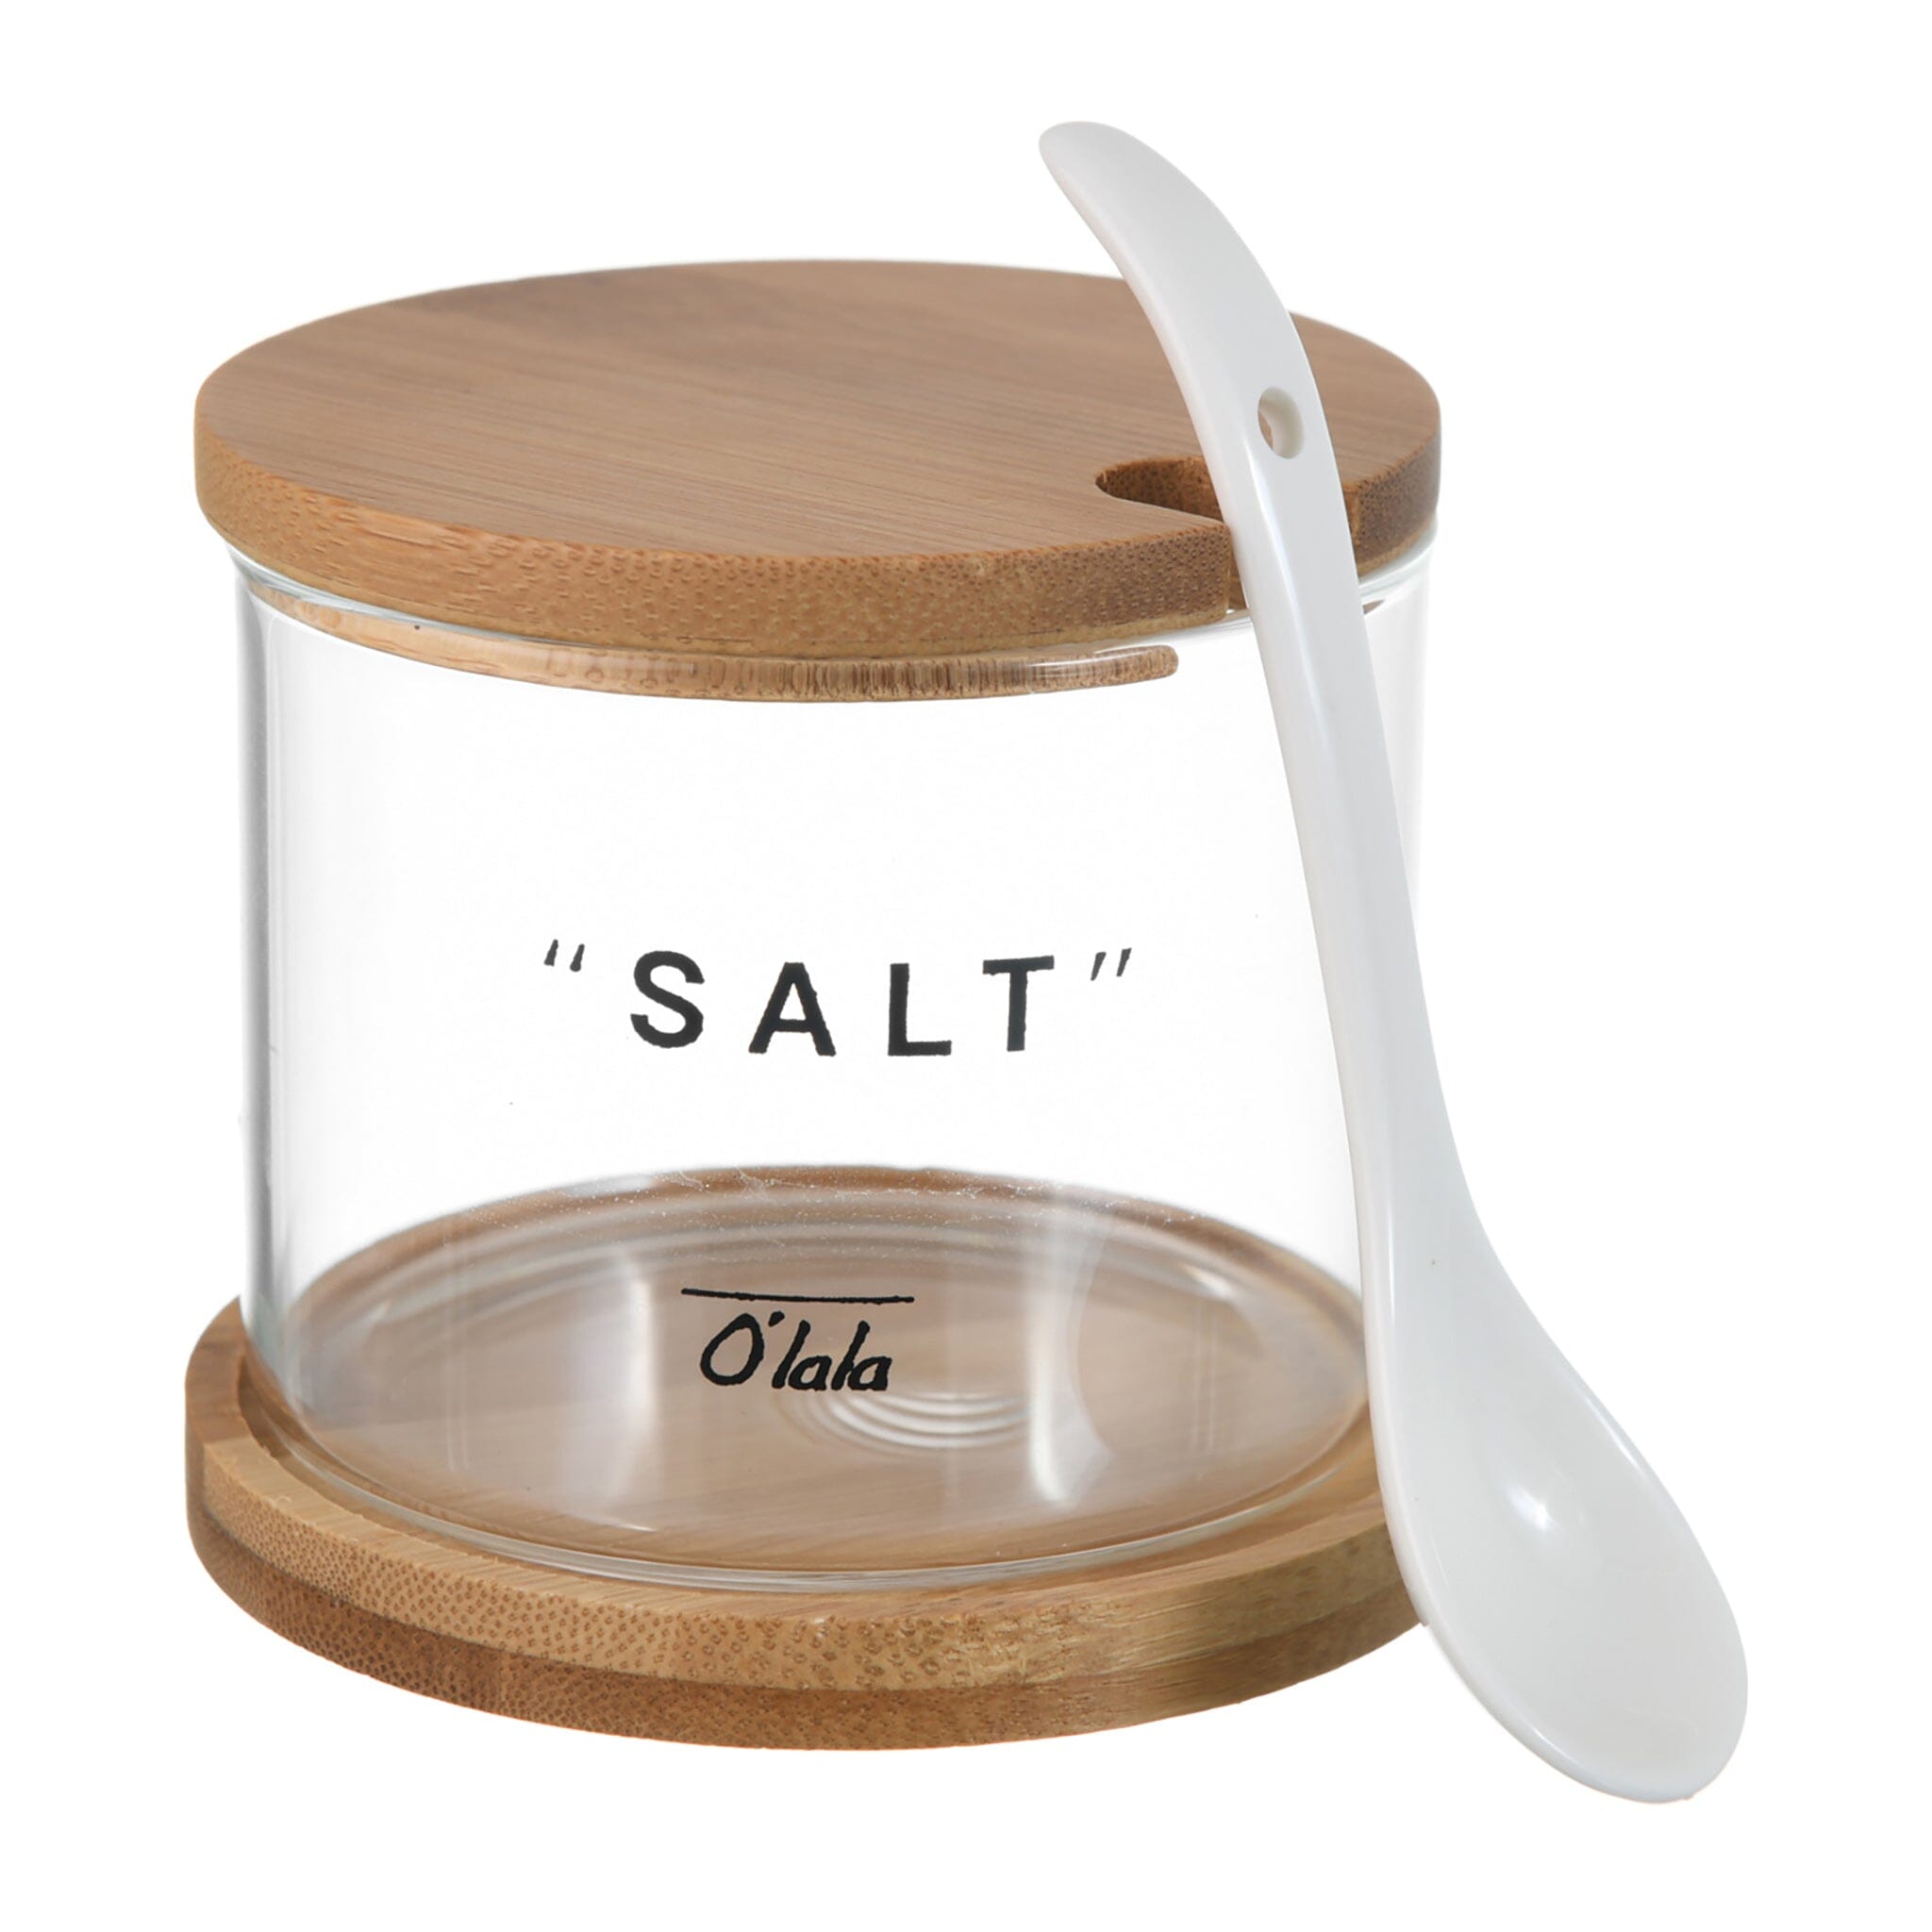 O'lala - Salt Jar with Wooden Cover & Spoon - 8x8cm - 520008147